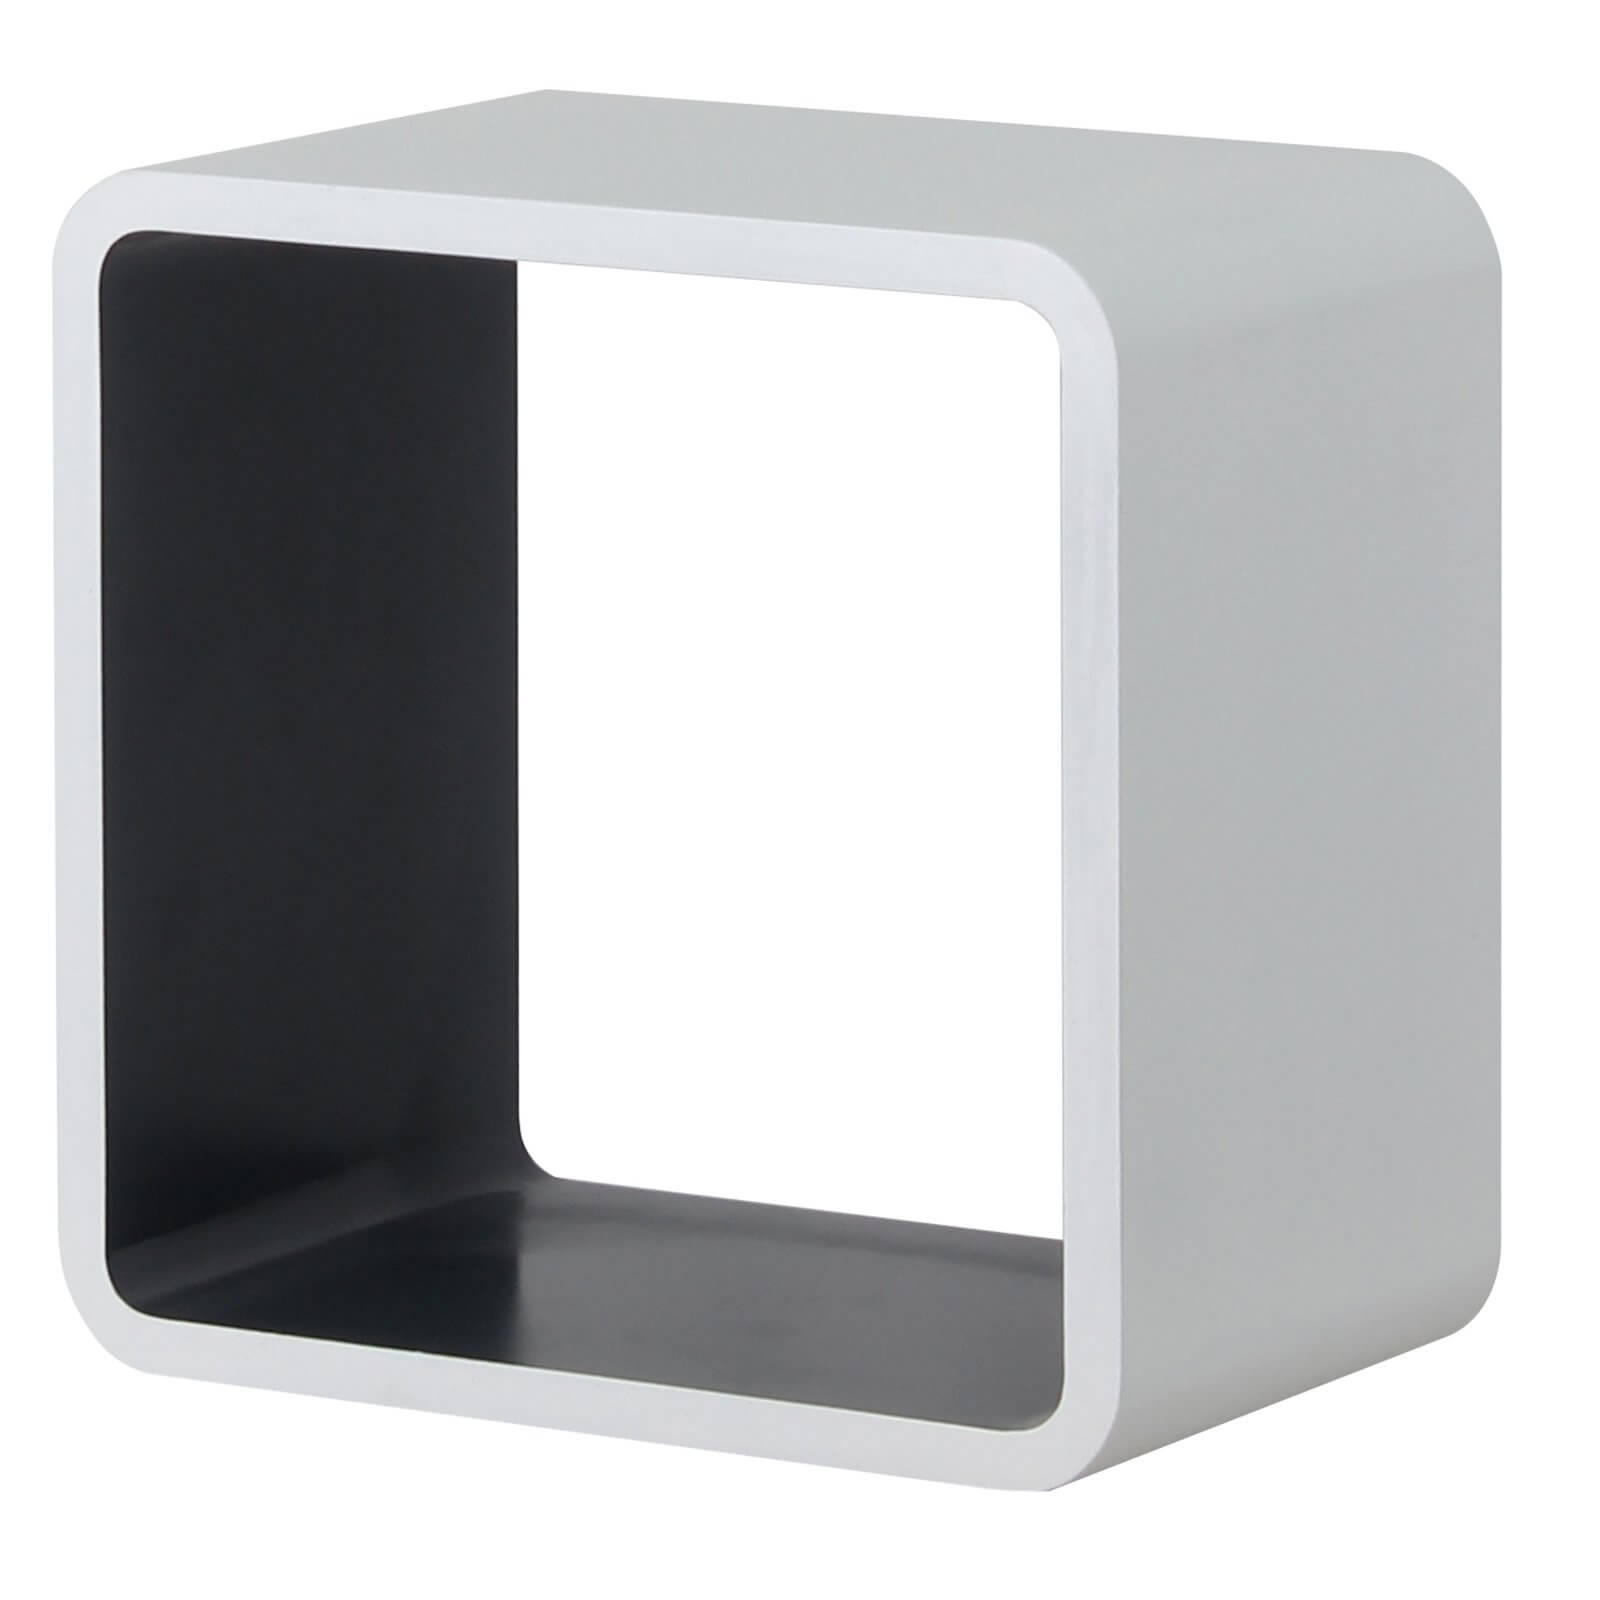 Cube Wall Shelf - White and Grey